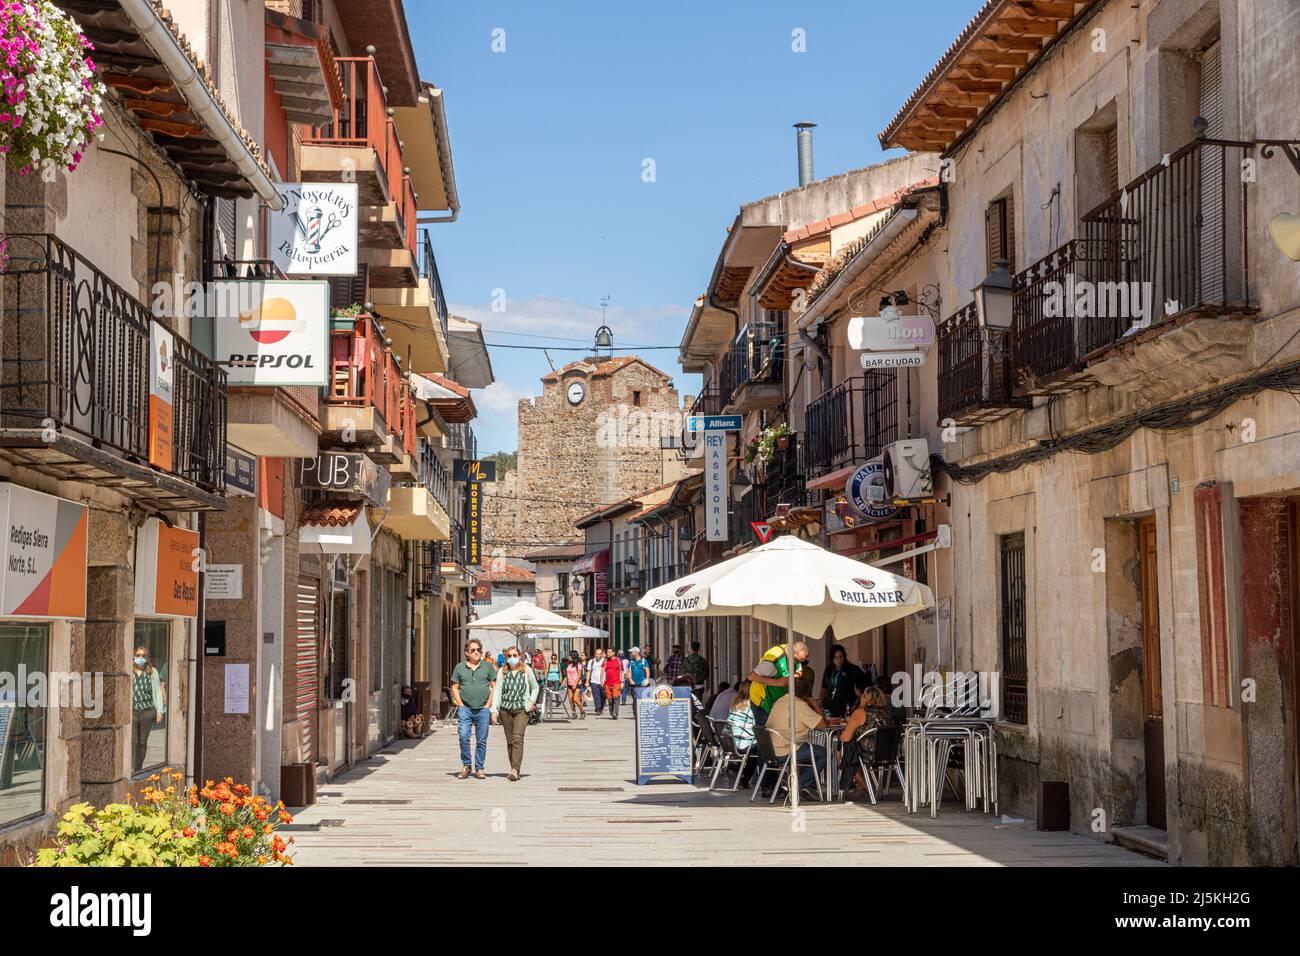 Buitrago del Lozoya, Spain. The Torre Albarrana, a city gate and defensive clock tower of the walled Old Town, seen from Calle Real Stock Photo